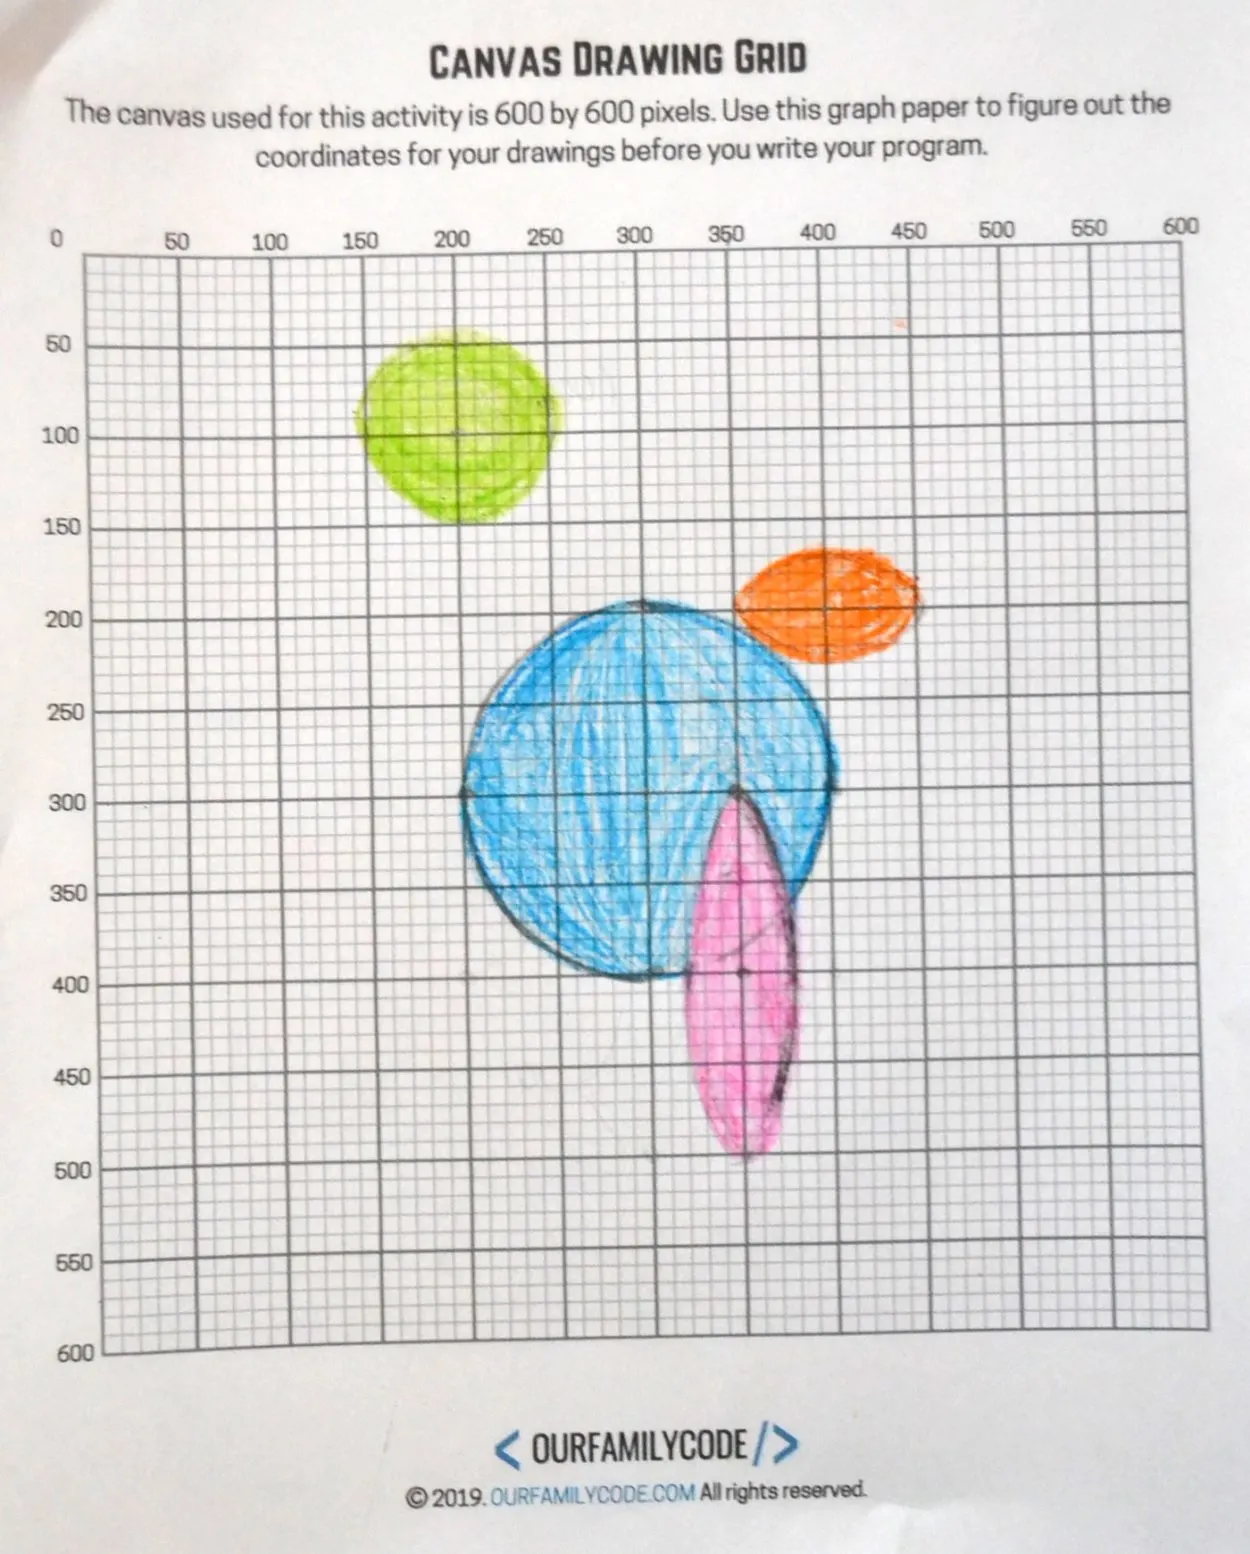 Learn how to code a circle with JavaScript by using grid drawings. #teachkidstocode #p5js #codingart